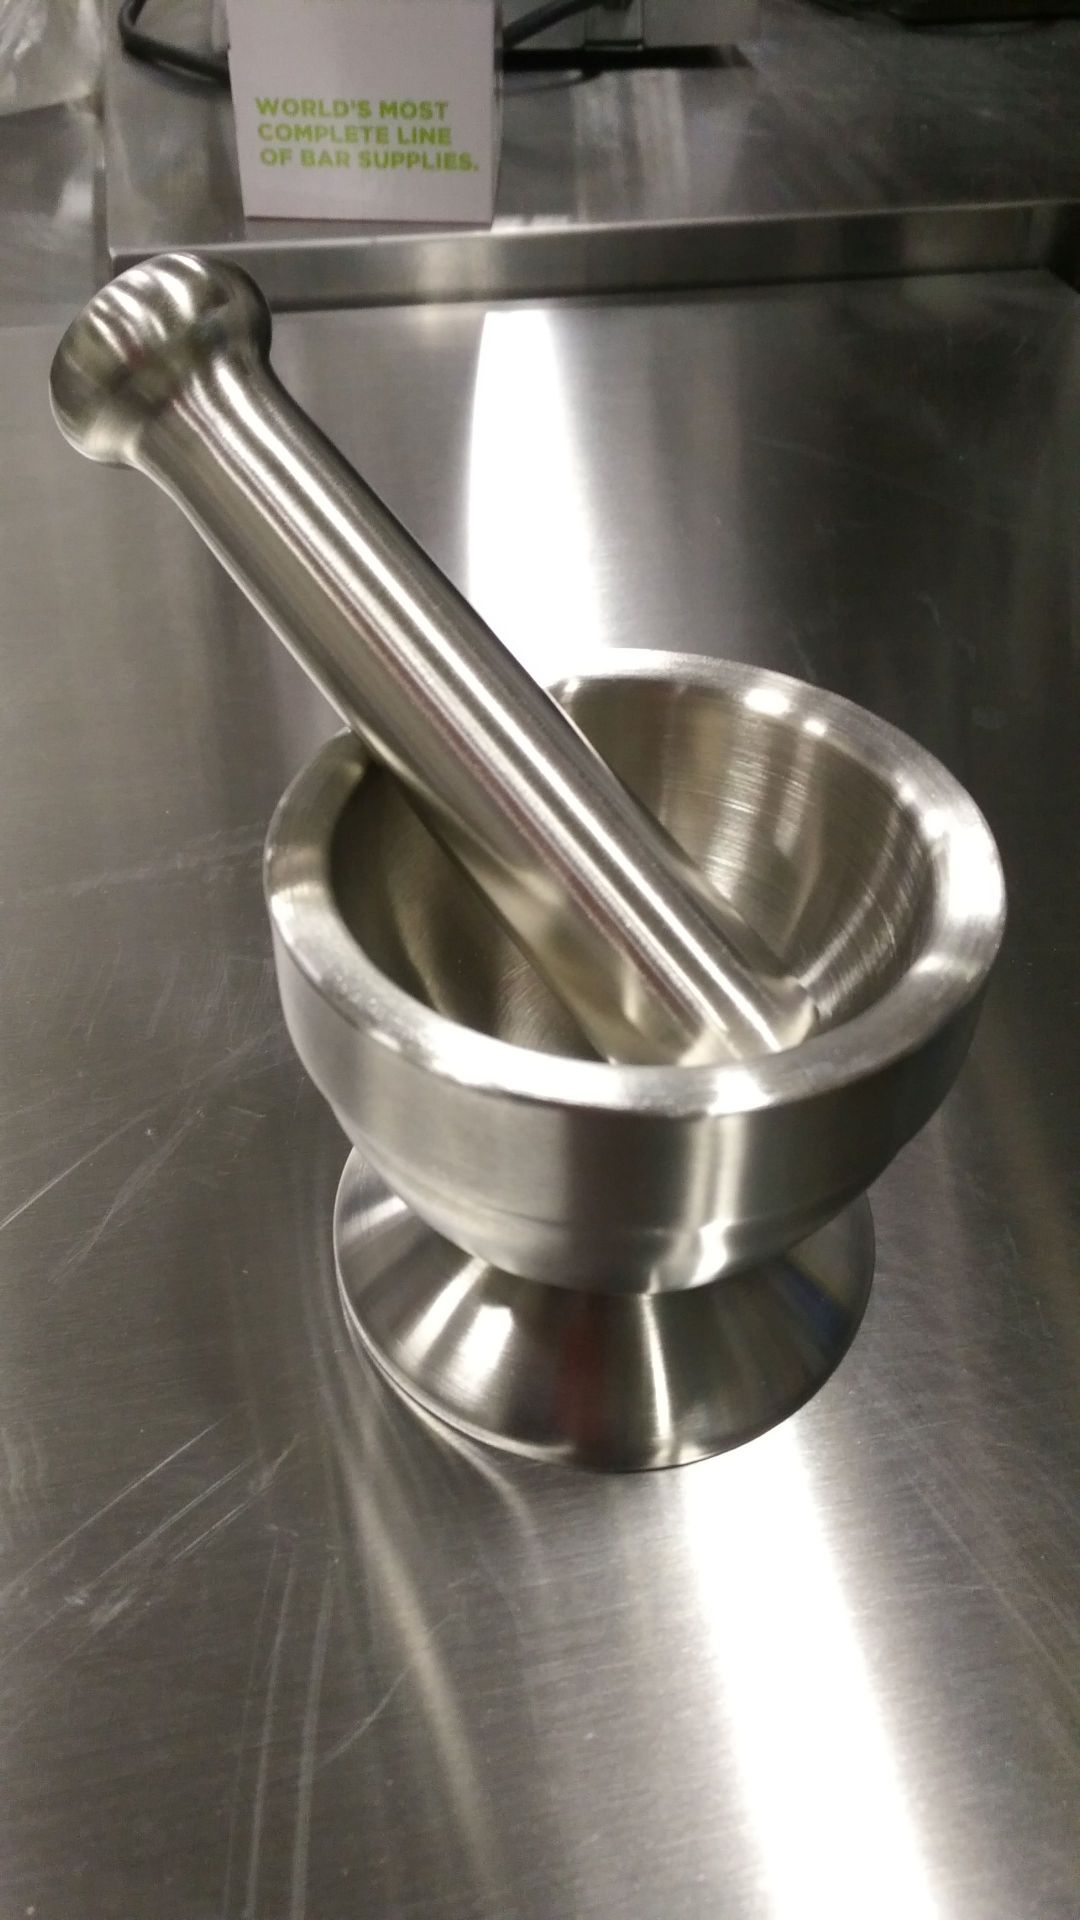 Stainless Steel Mortar and Pestle, Amco 8395